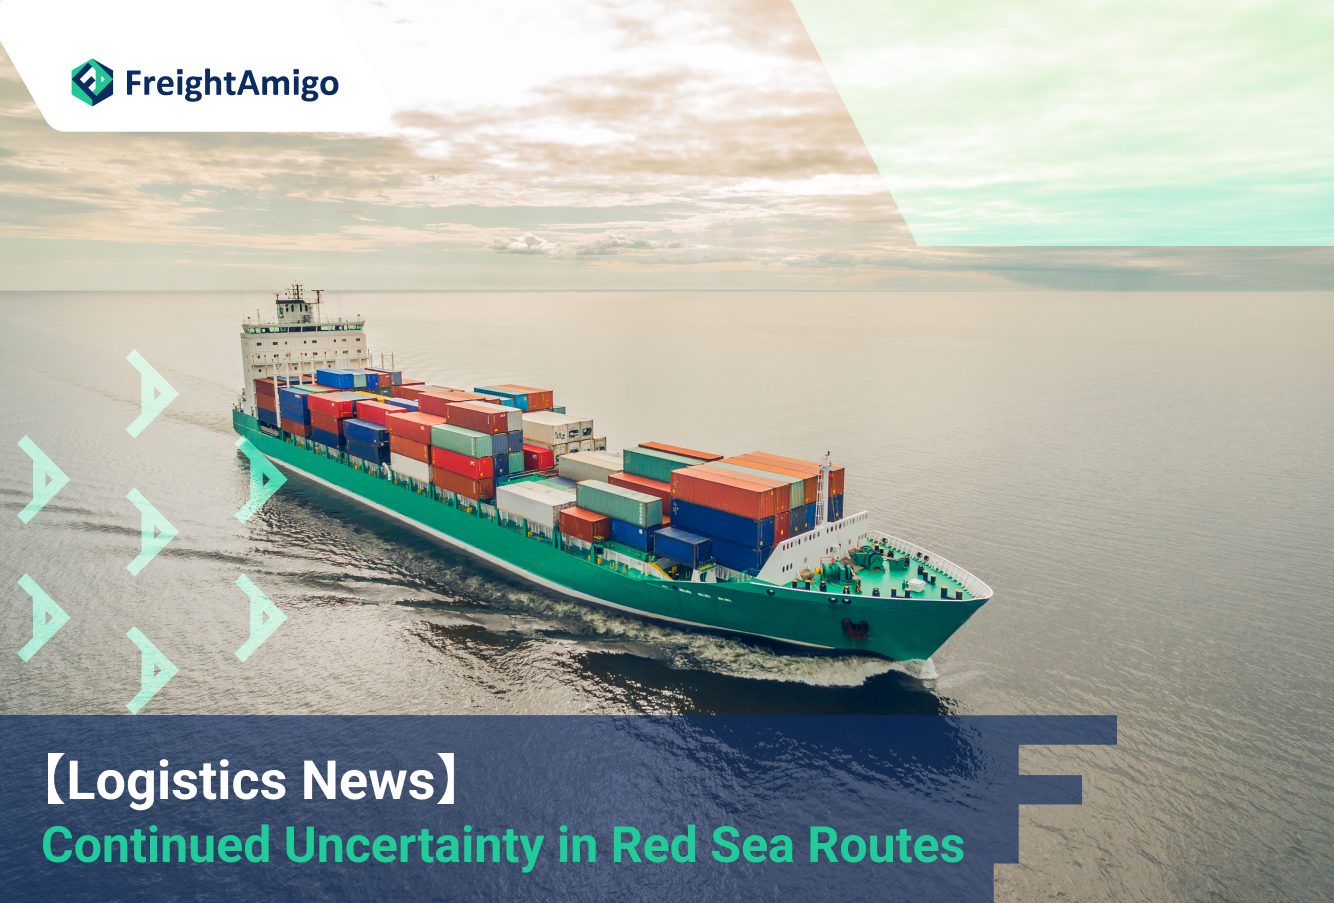 【Logistics News】Continued Uncertainty in Red Sea Routes